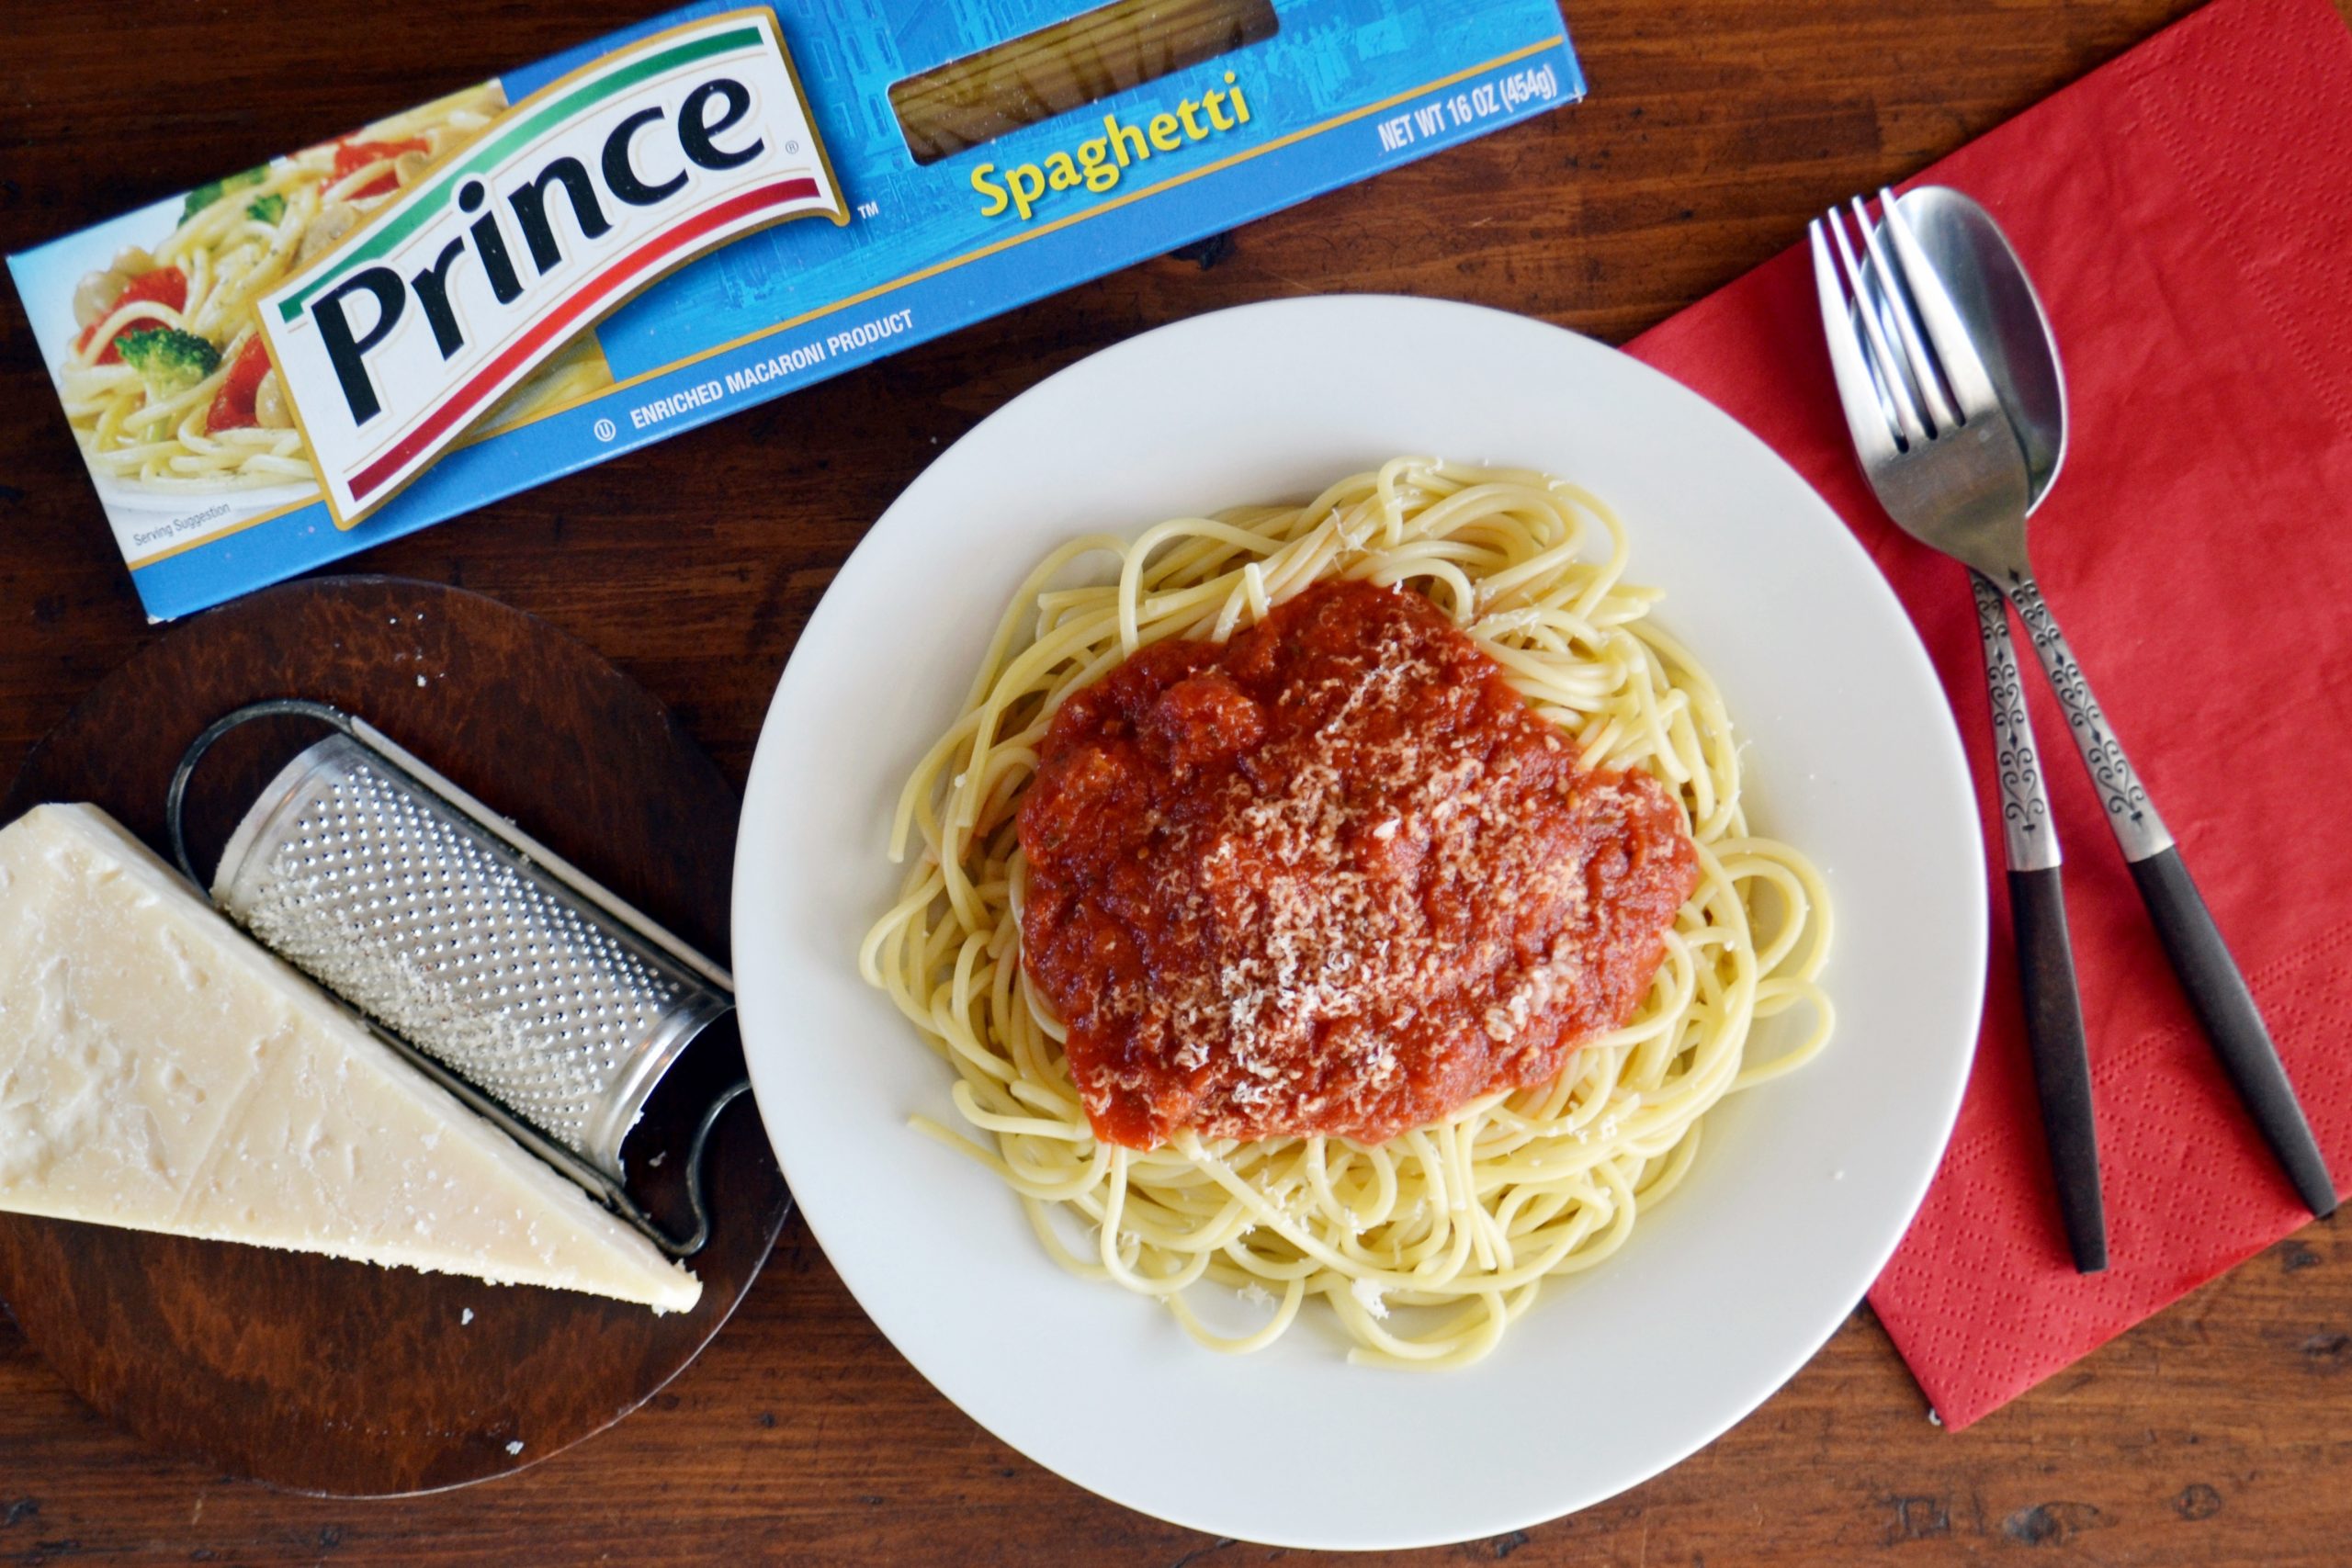 Wednesday is Prince Spaghetti Day